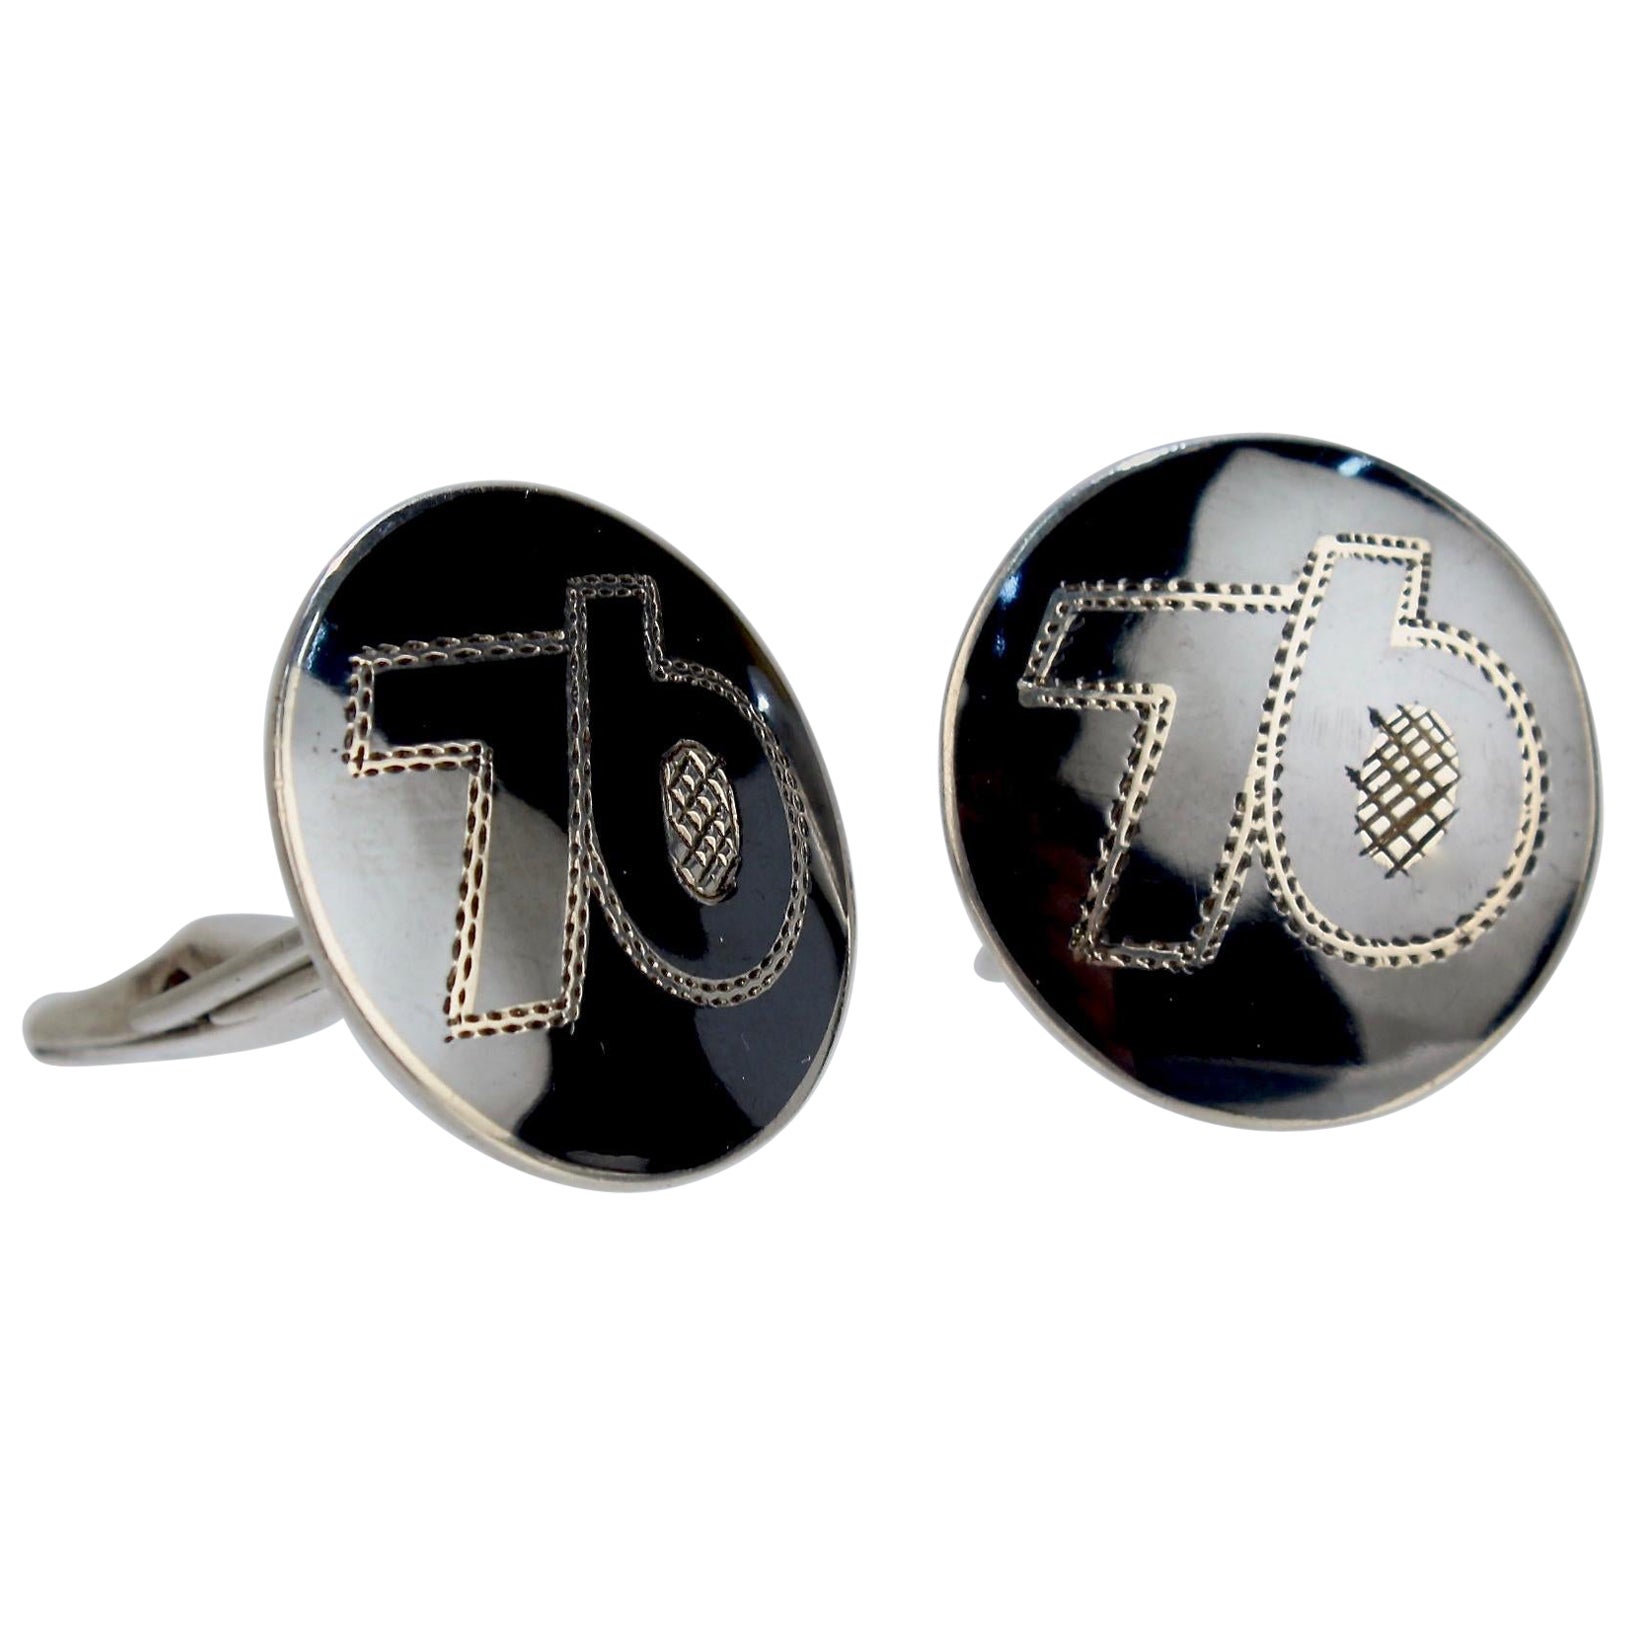 Pair of '76' Niello Sterling Silver Cufflinks by Alex Co of Siam For Sale